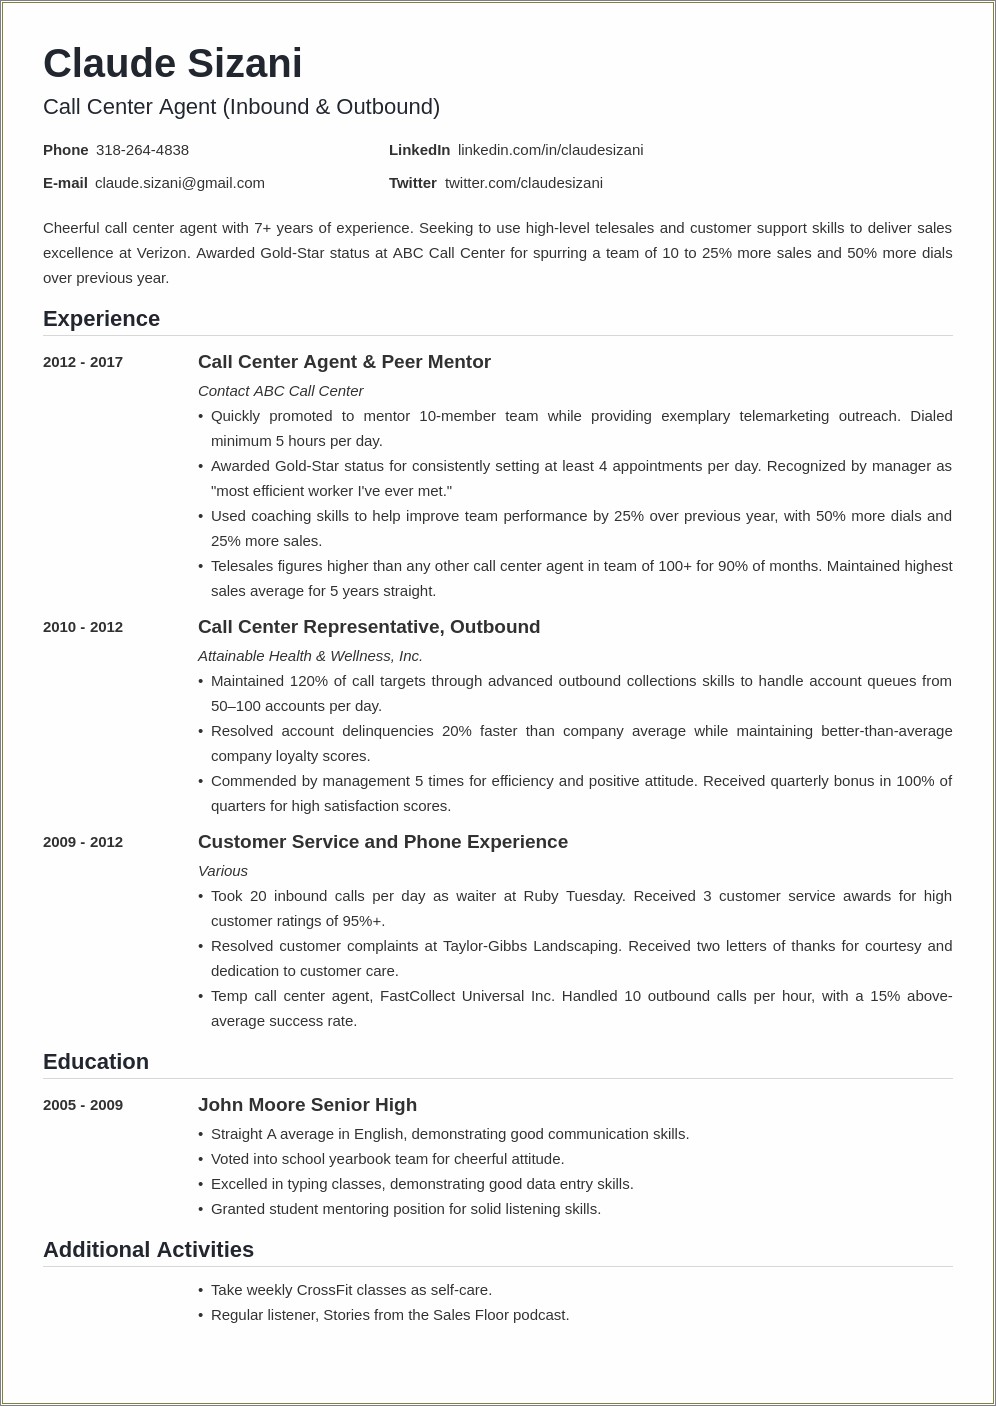 Resume Examples For Customer Call Center